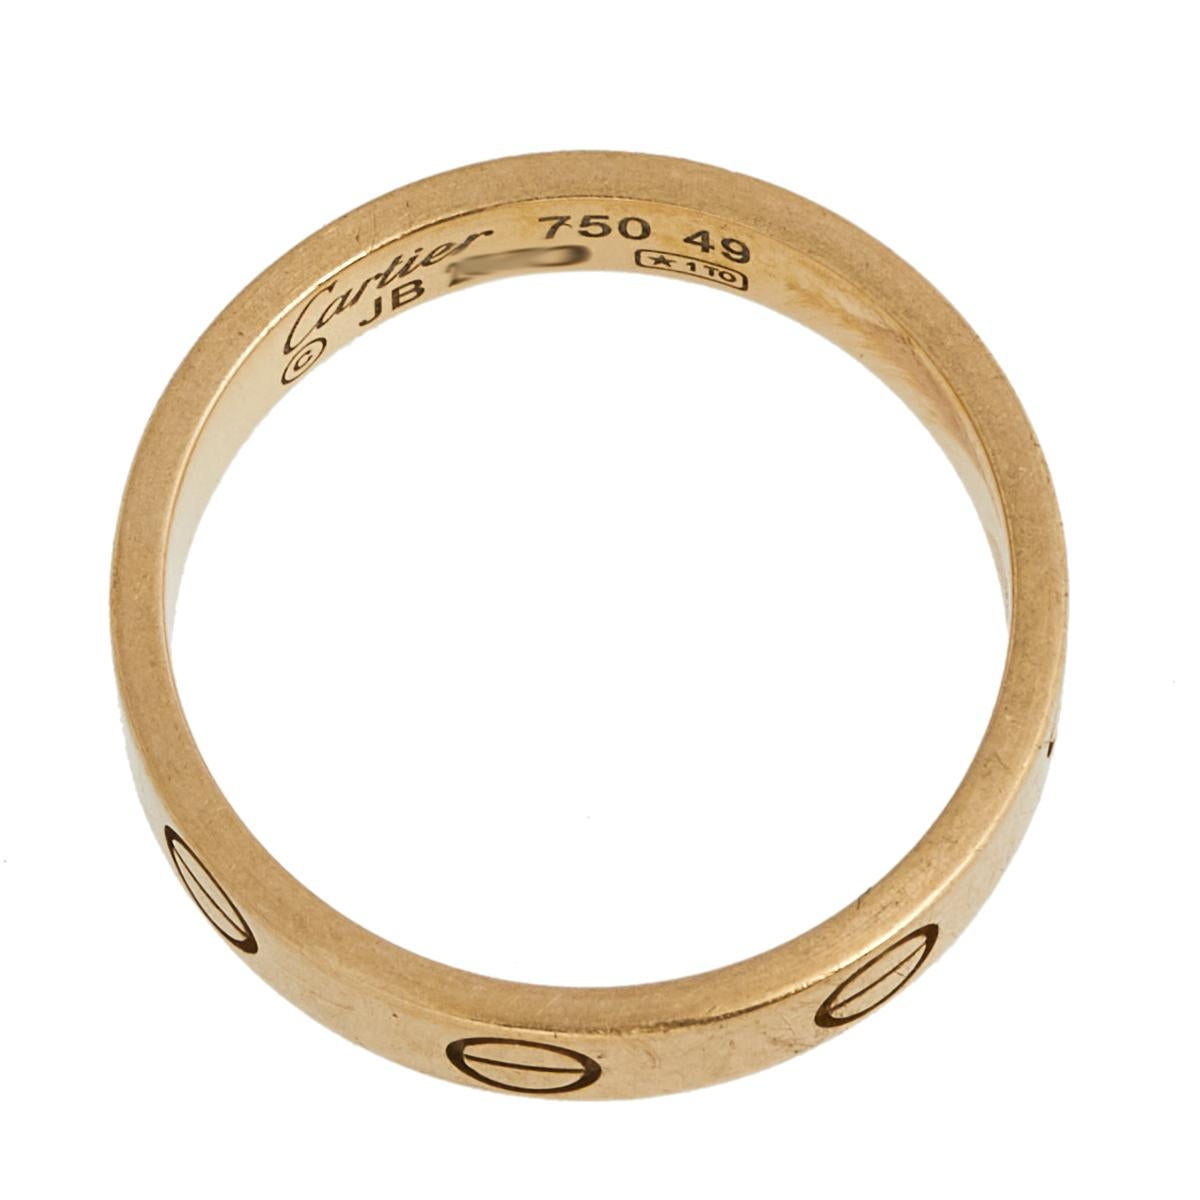 One of the most iconic and loved designs from the house of Cartier, this stunning Love ring is an icon of style and luxury. Constructed in 18k yellow gold, this ring features screw details all around the surface as symbols of a sealed and secured